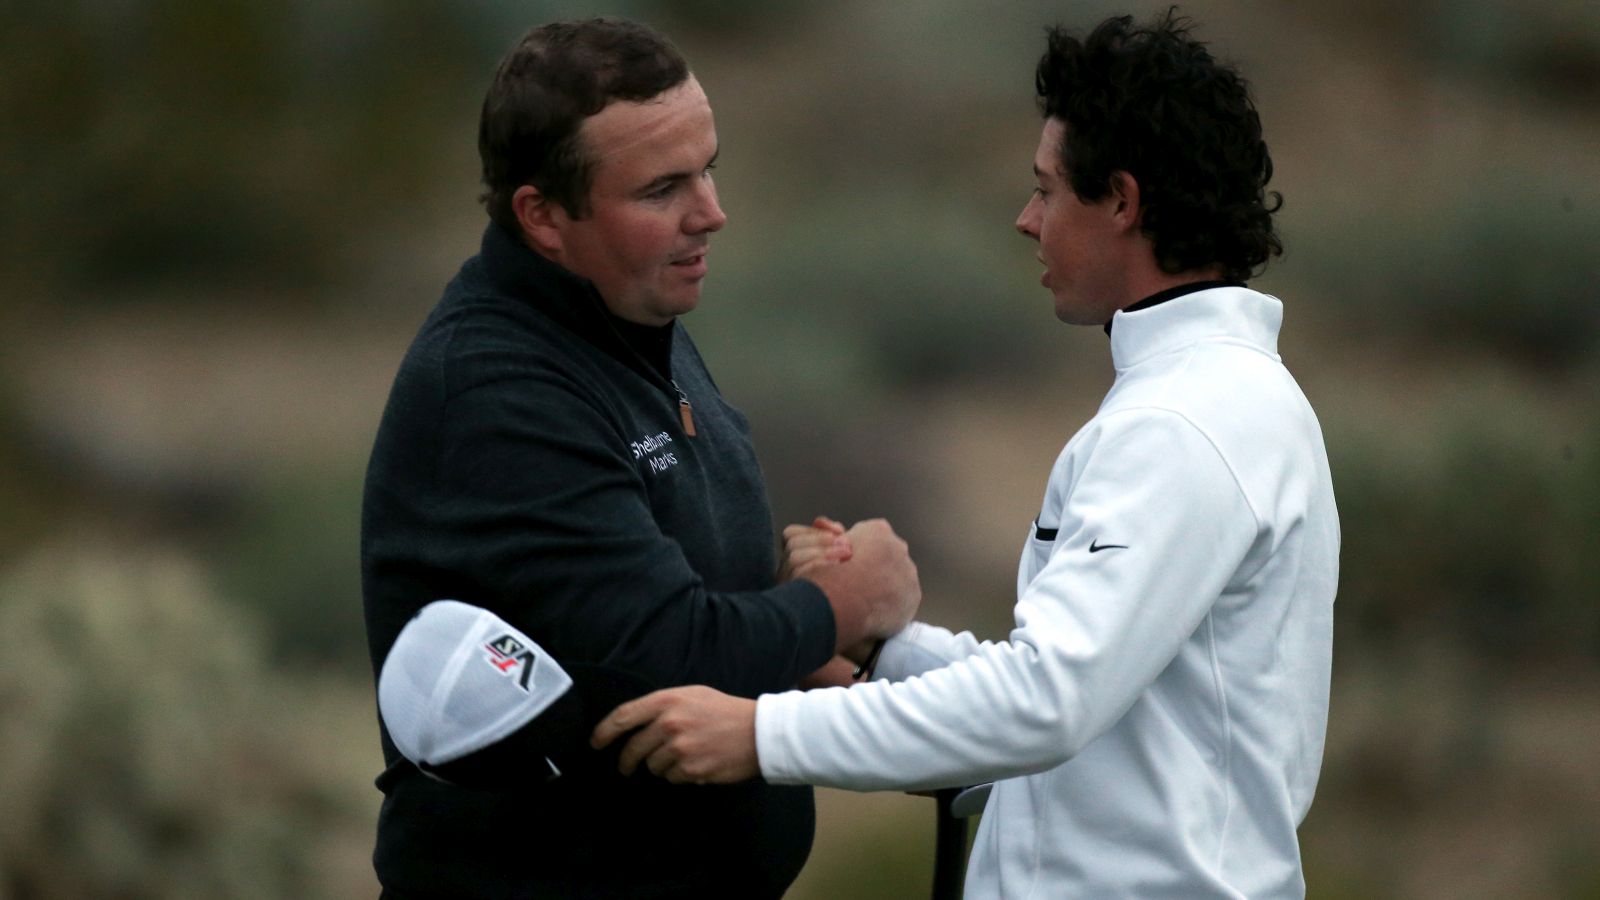 2013 - Lowry mit Rory McIlroy bei der World Golf Championship in Arizona. © Andy Lyons/Getty Images